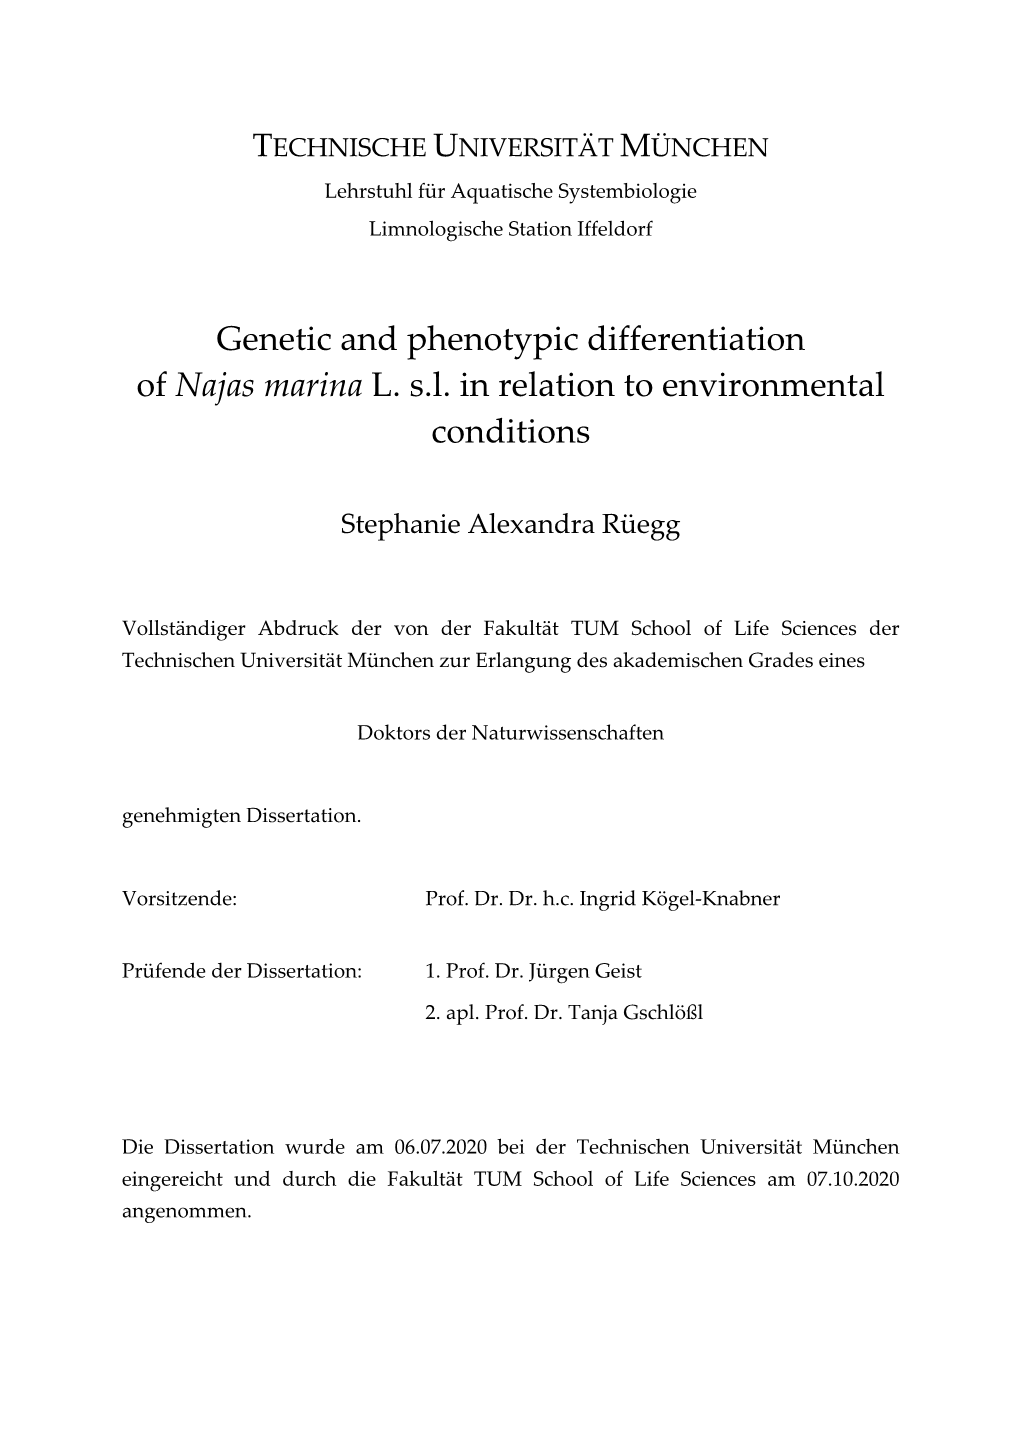 Genetic and Phenotypic Differentiation of Najas Marina L. S.L. in Relation to Environmental Conditions